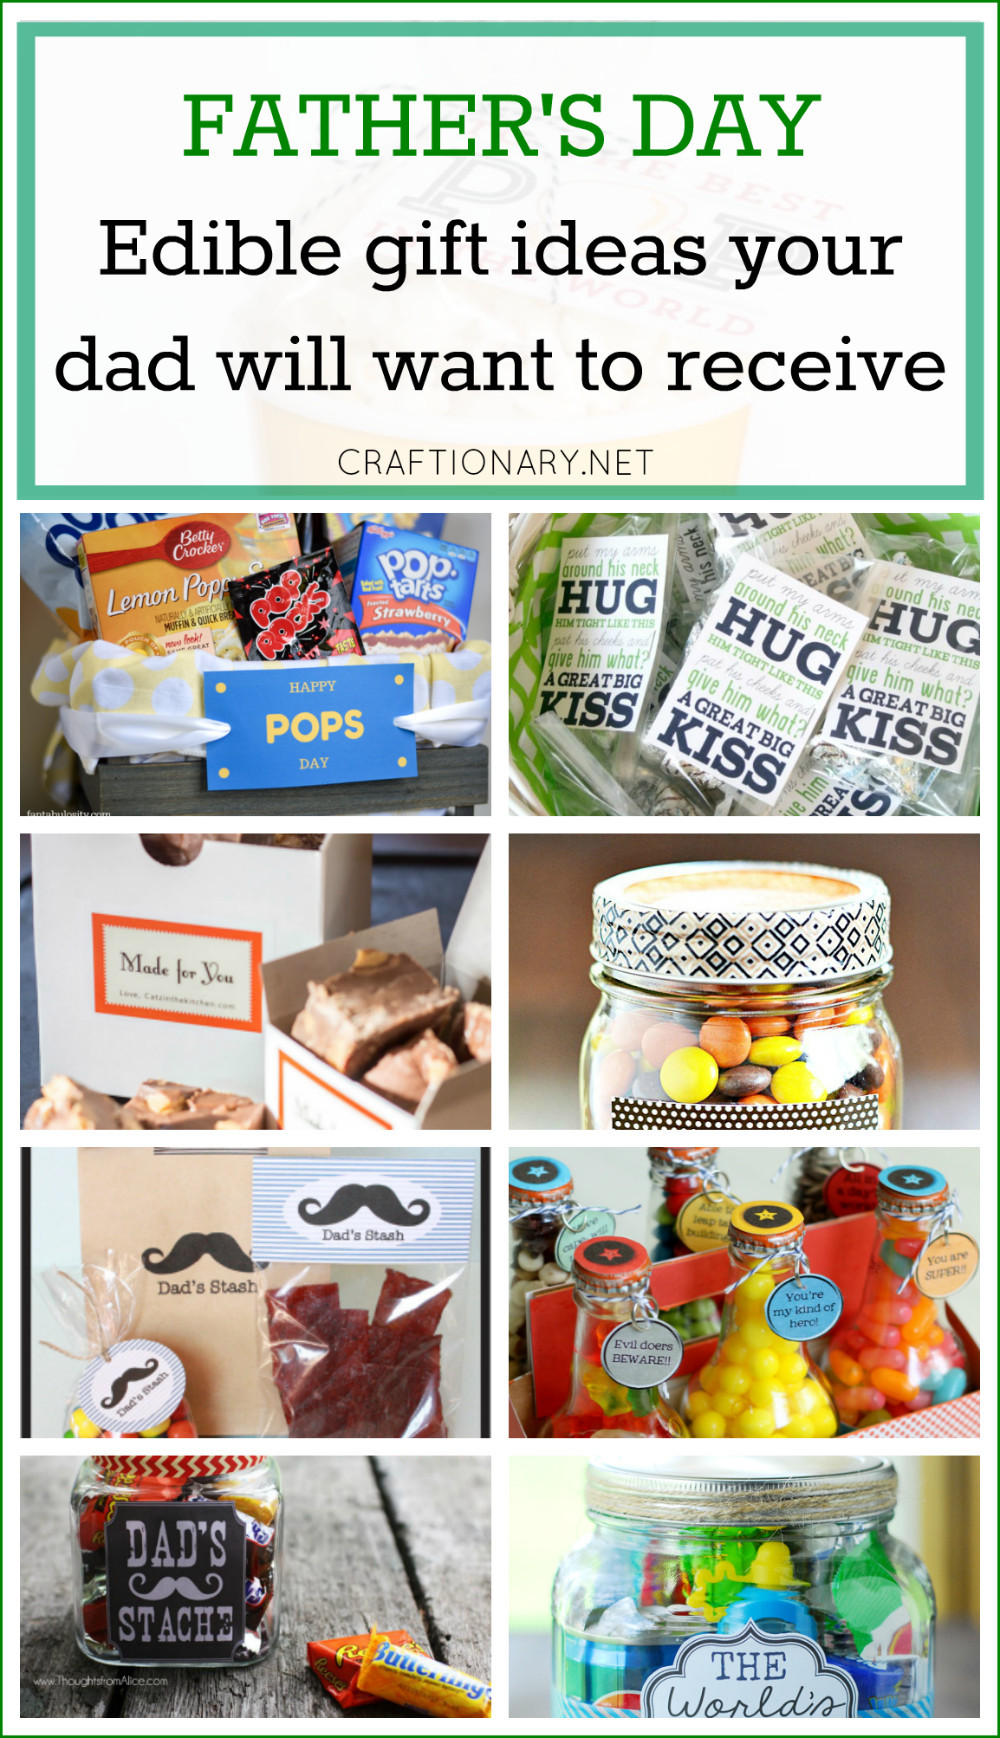 Men'S Father'S Day Gift Ideas
 The Best Father s Day Gift Ideas From Kids Home Ideas